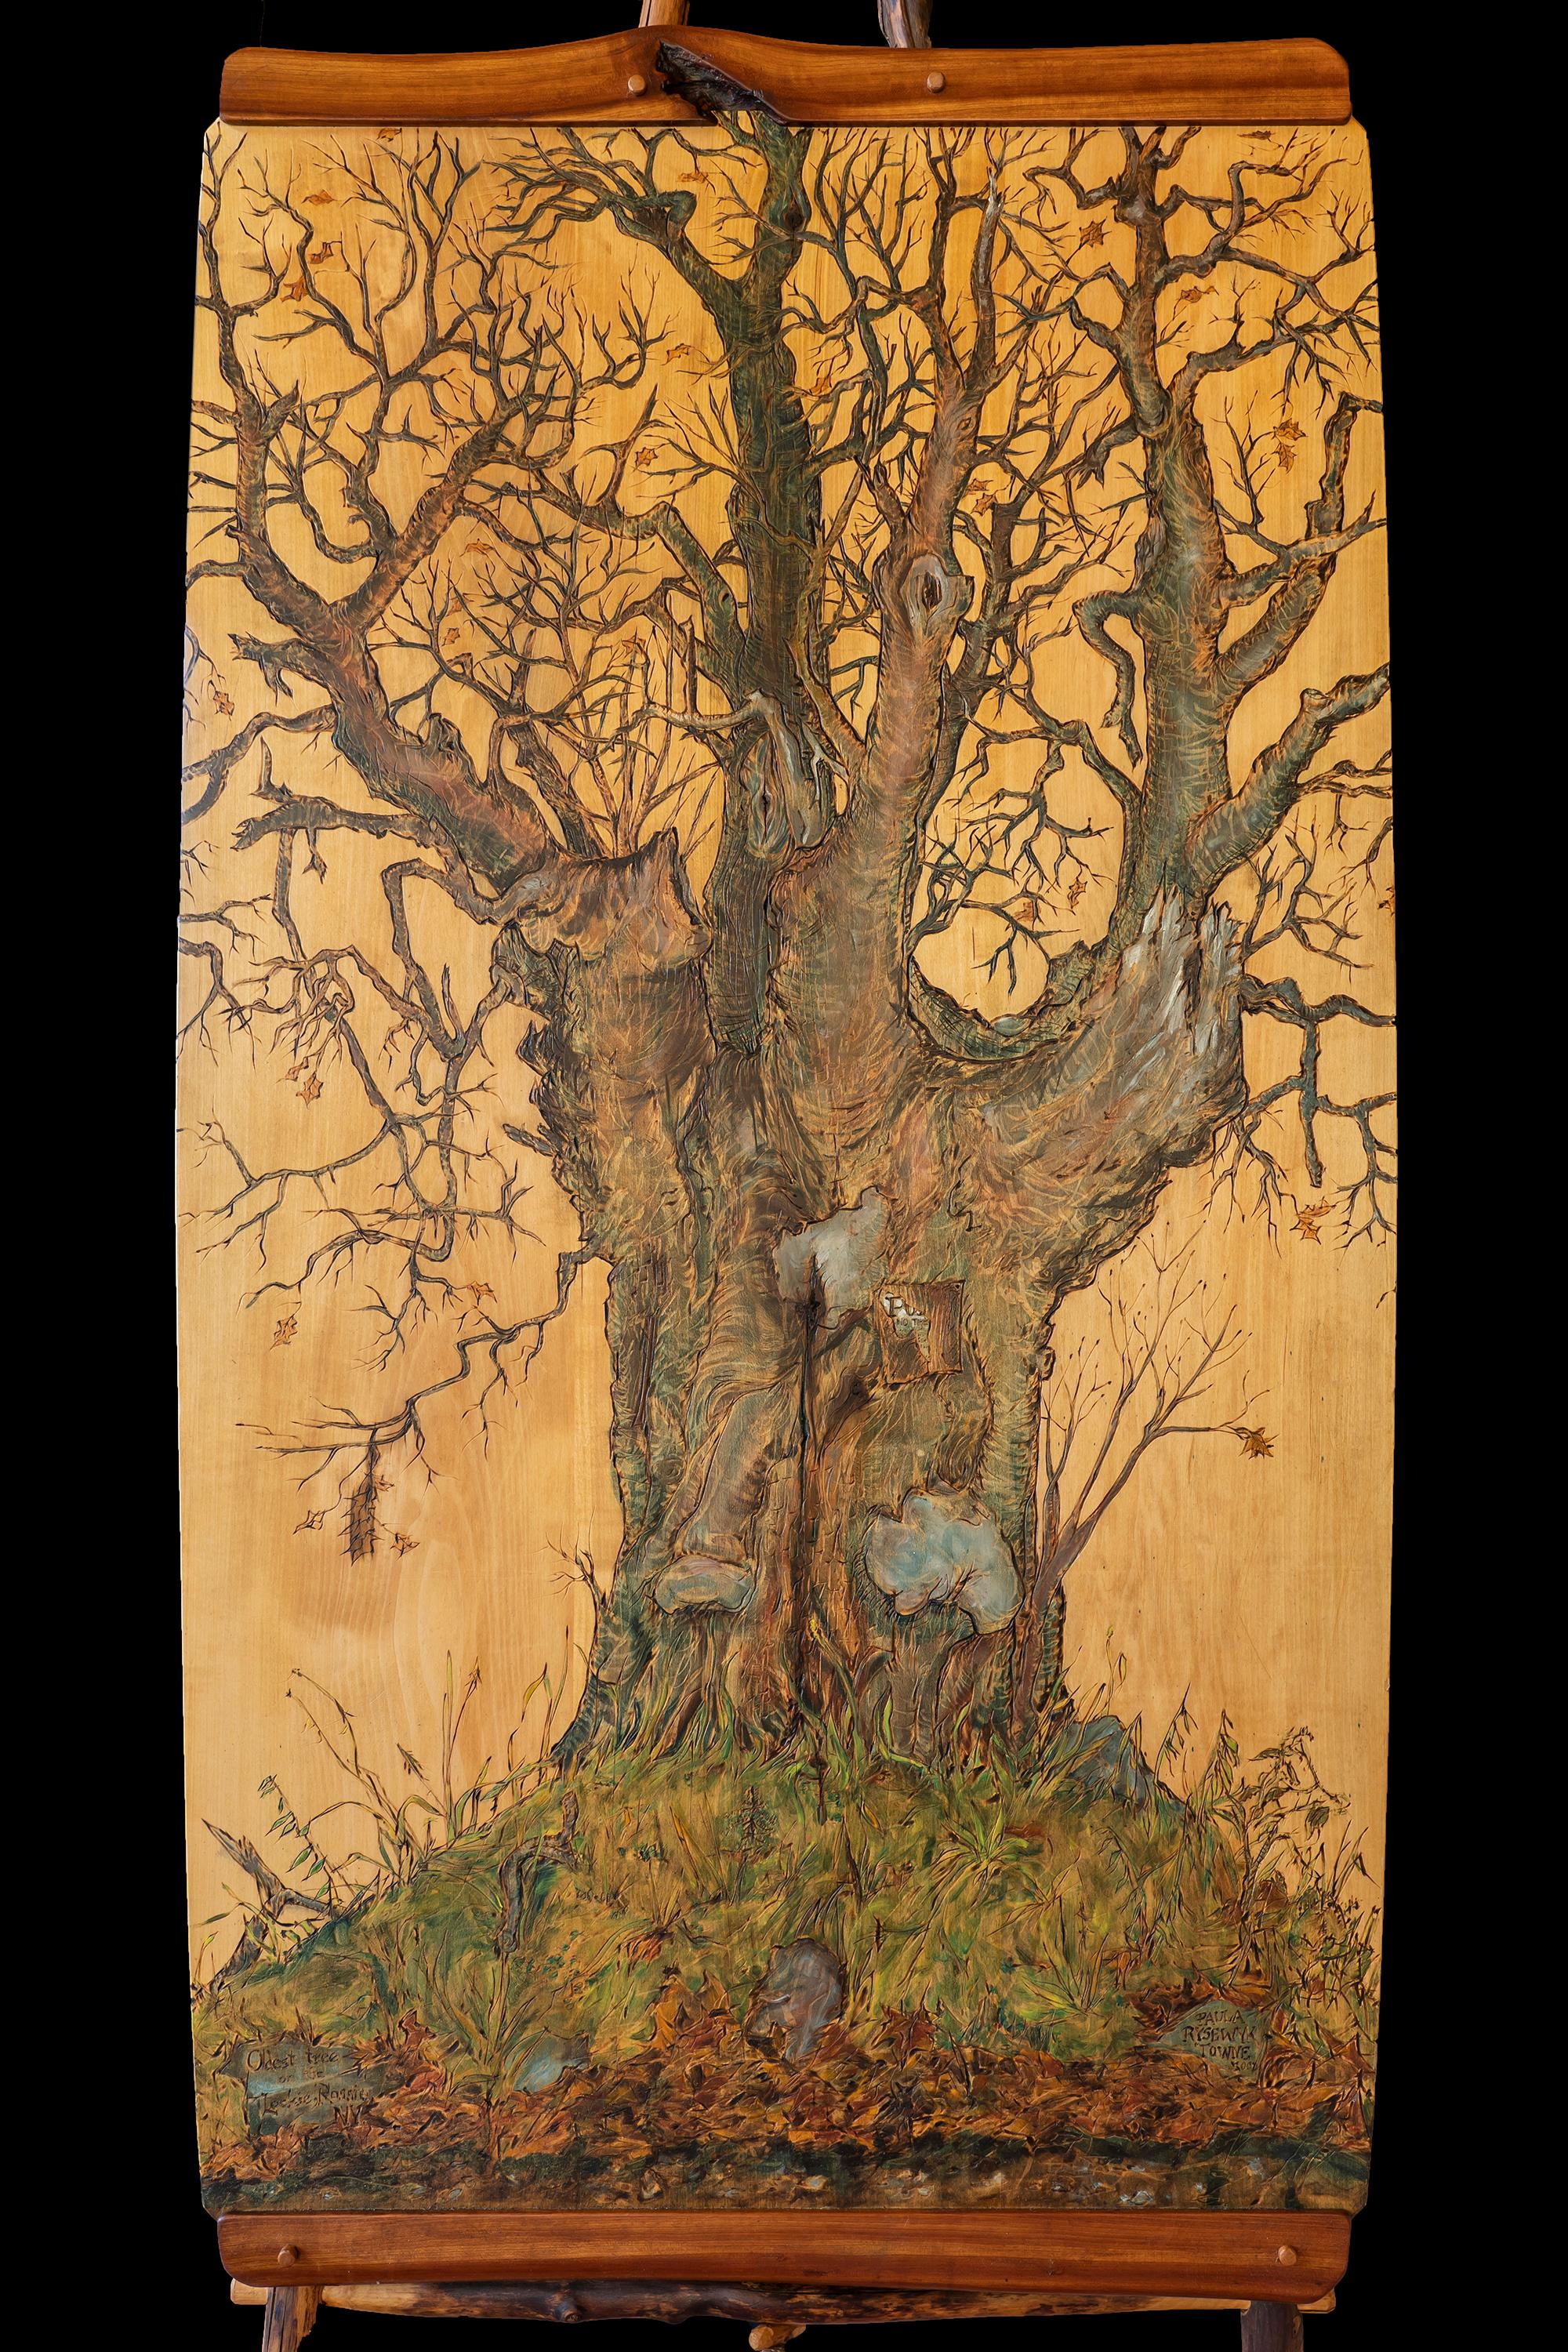 Oldest Tree on the Lockie Road, Rossie New York, Acrylic on Wood by Paula Towne